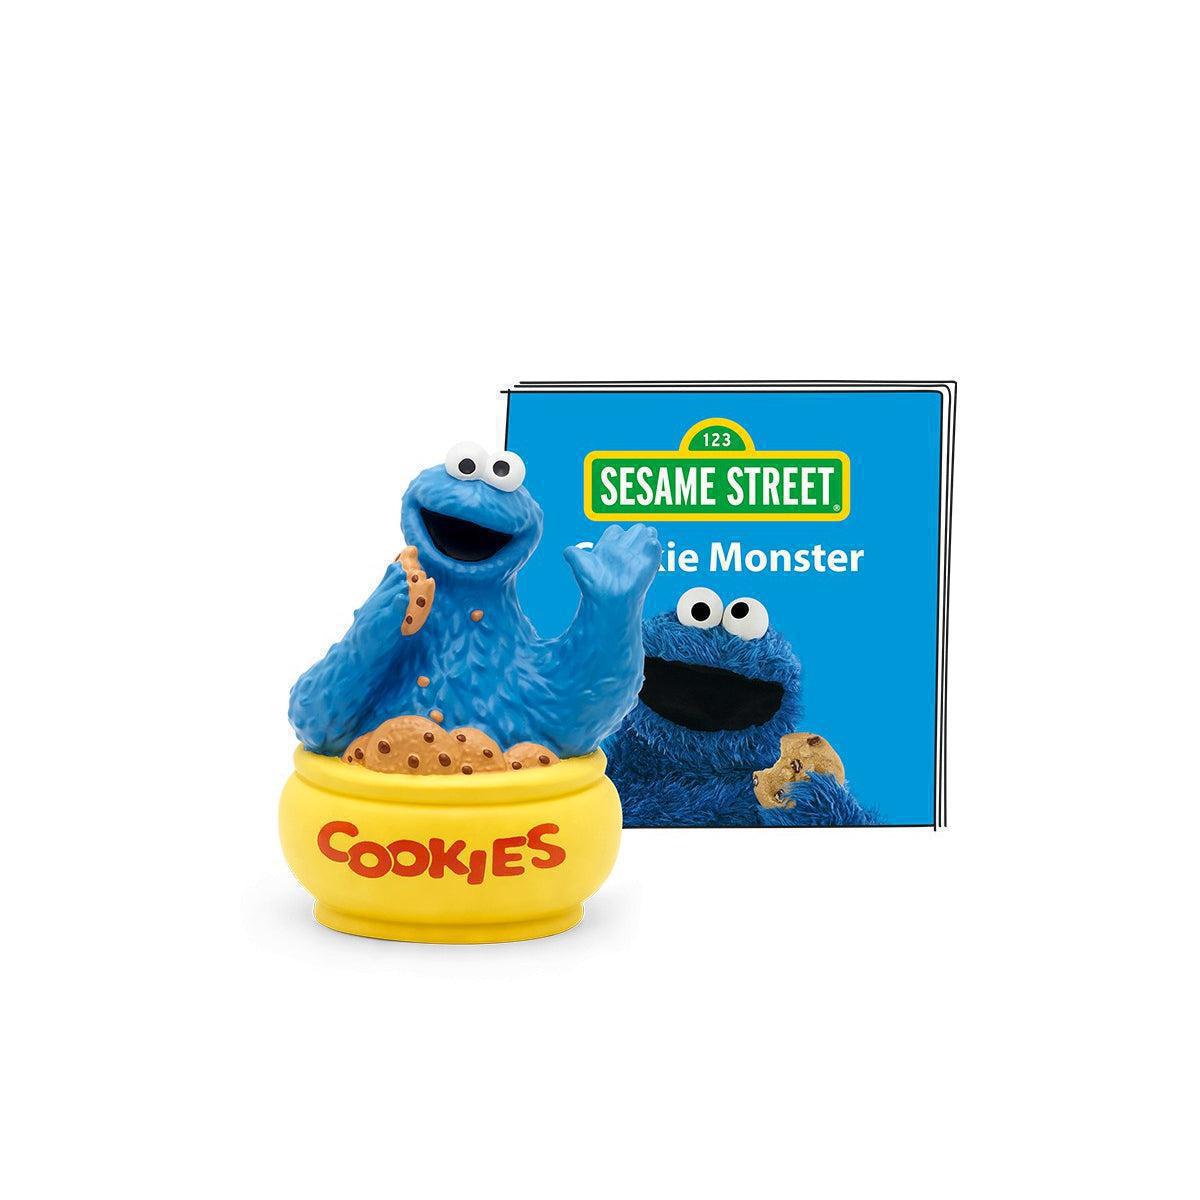 Tonies Sesame Street - Cookie Monster - Audio Character for use with Toniebox Player